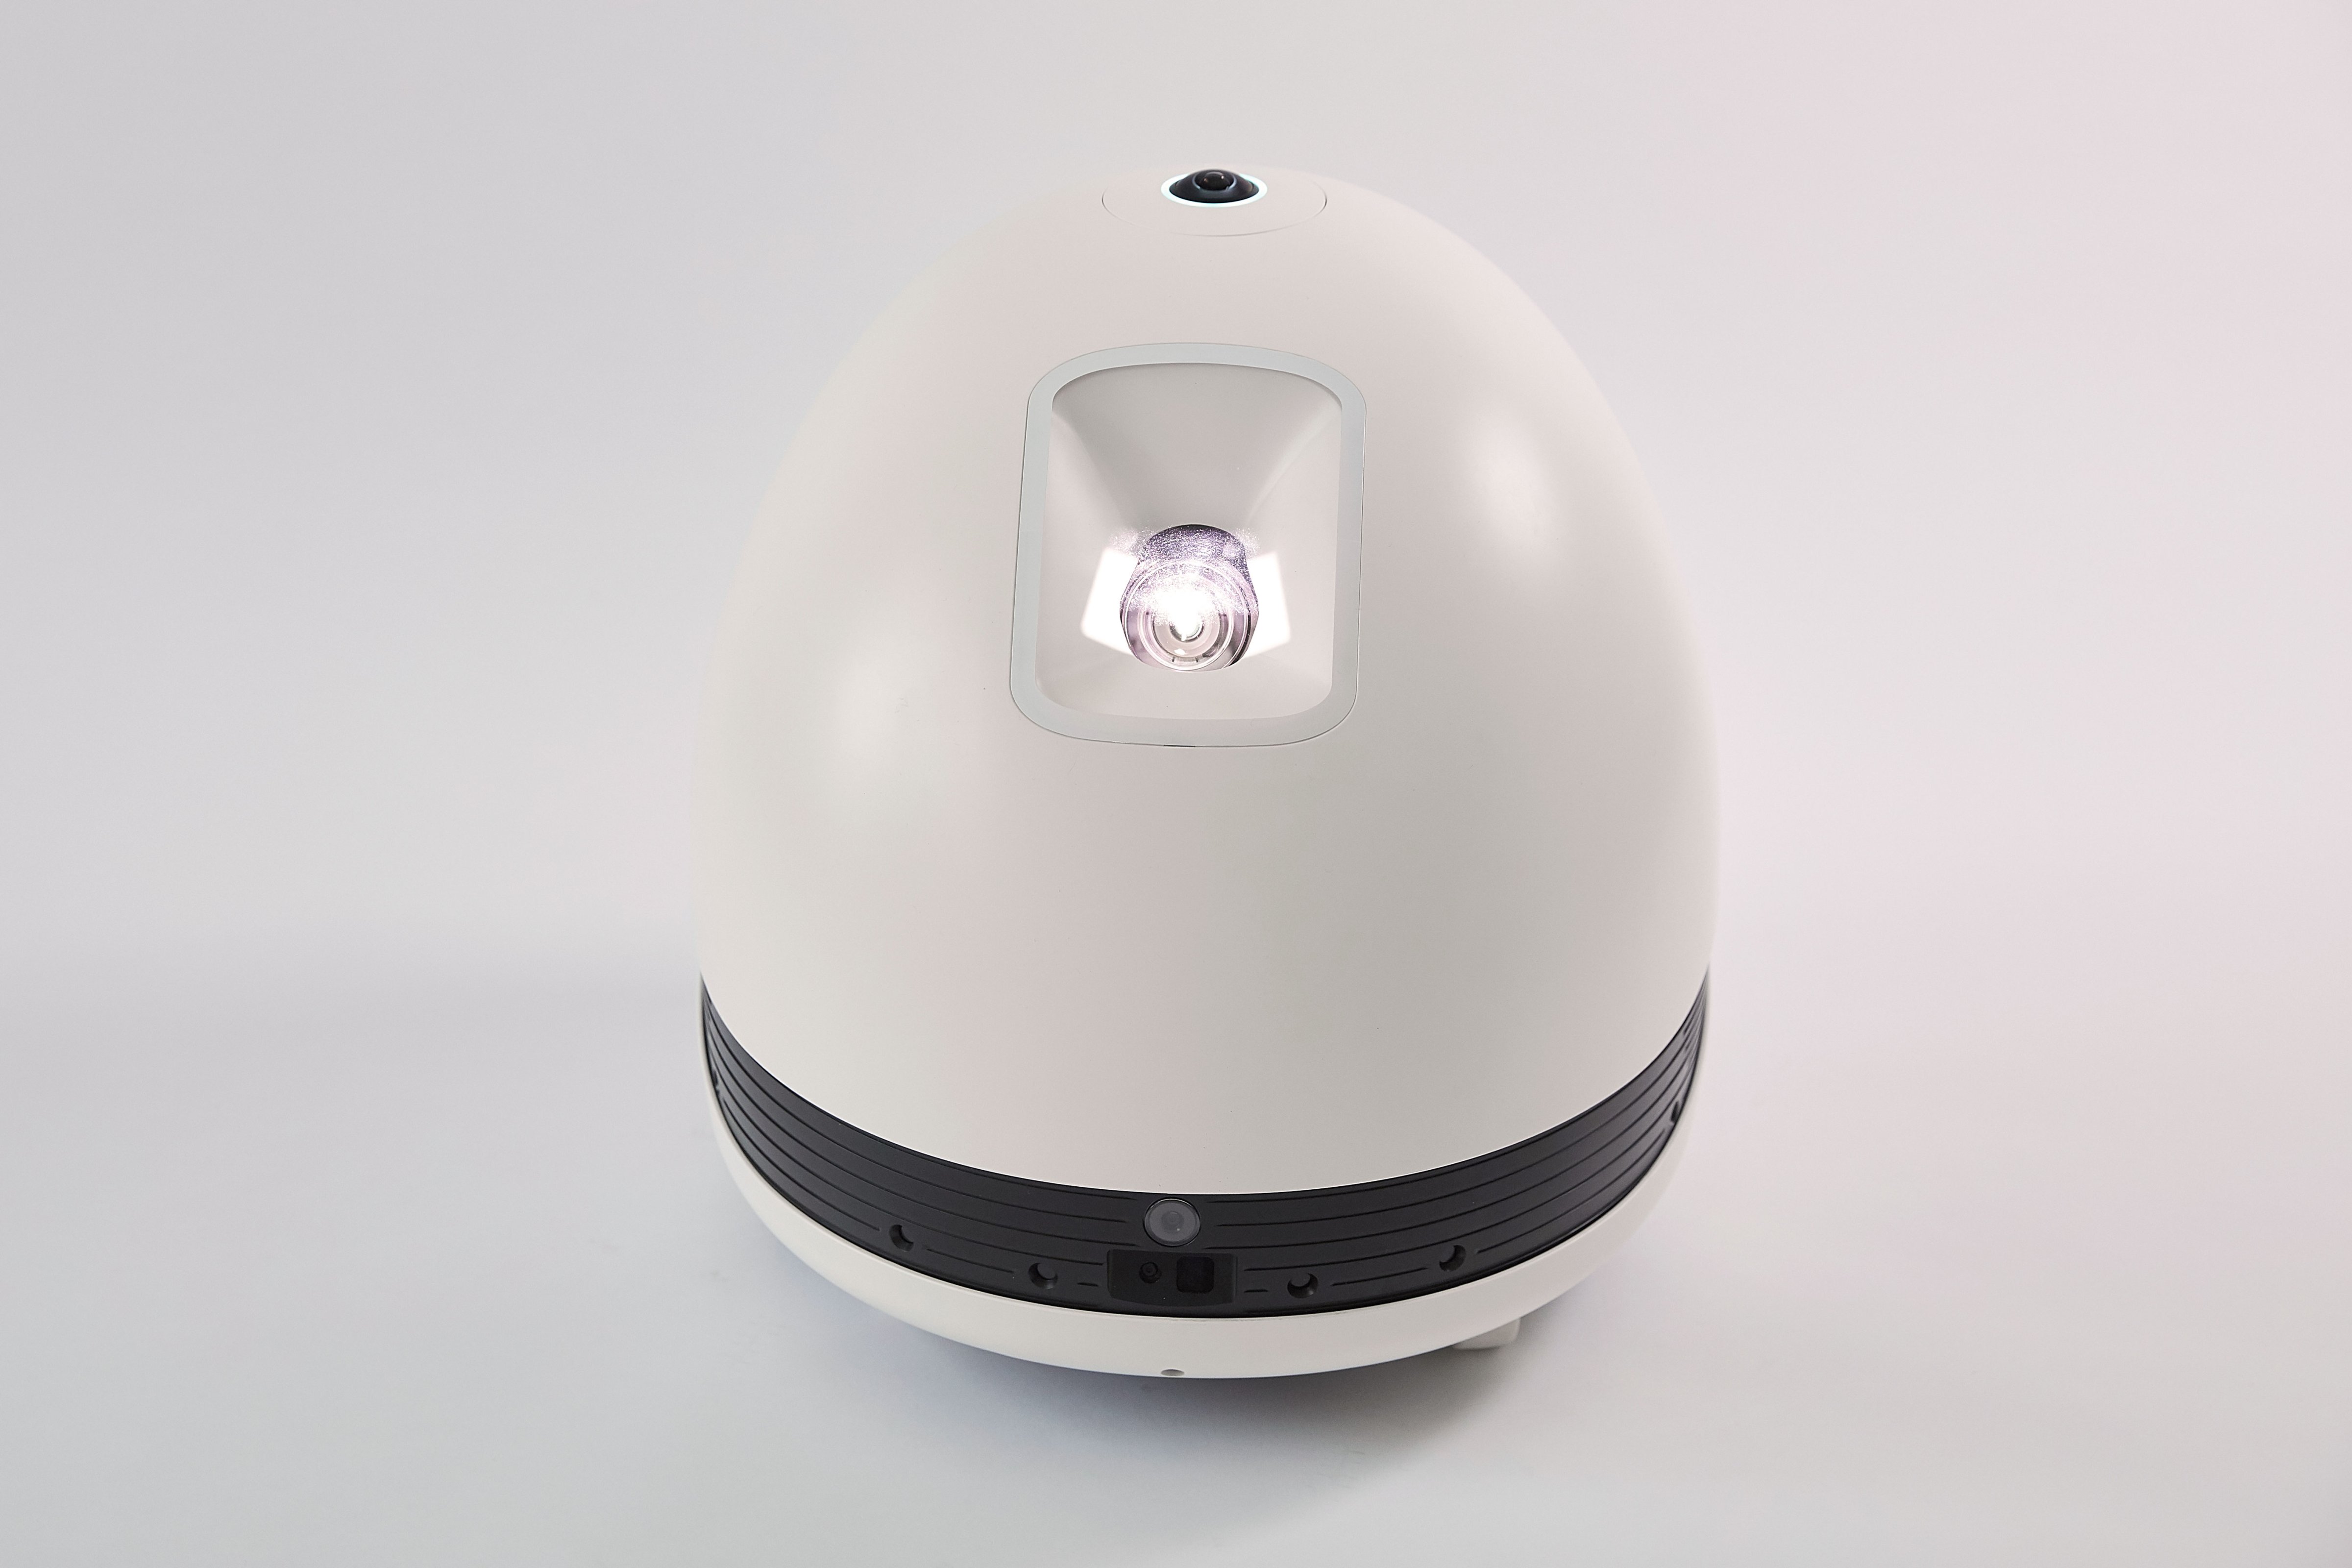 The Keecker robot doubles as a projector and security camera (cFlorent Drillon)